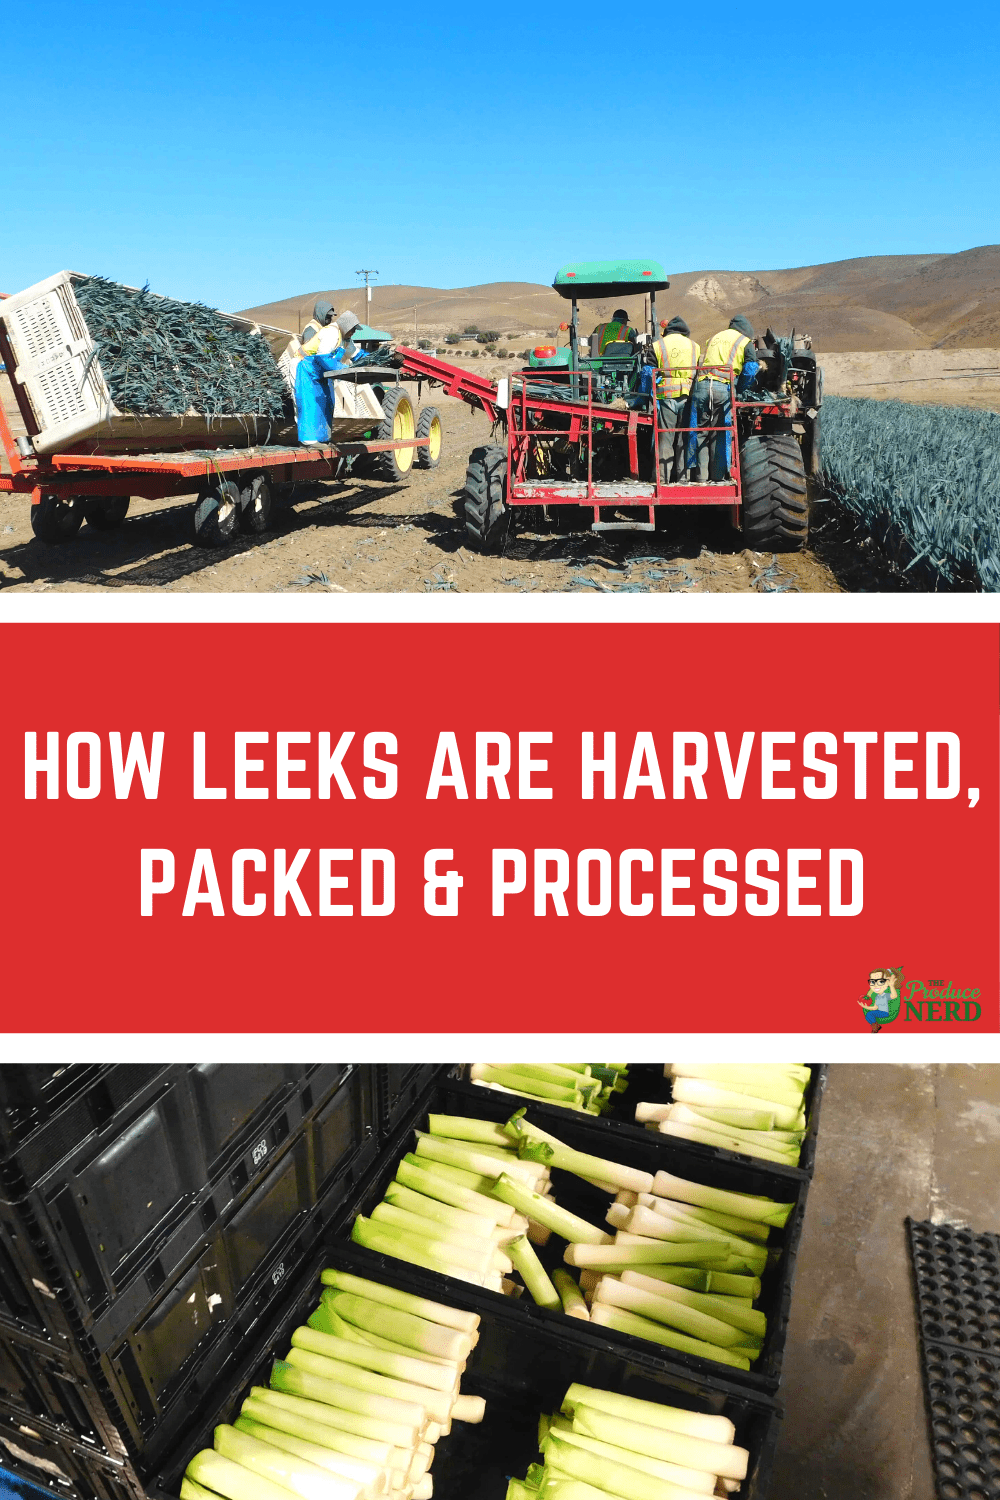 You are currently viewing Leek Harvesting, Packing & Processing